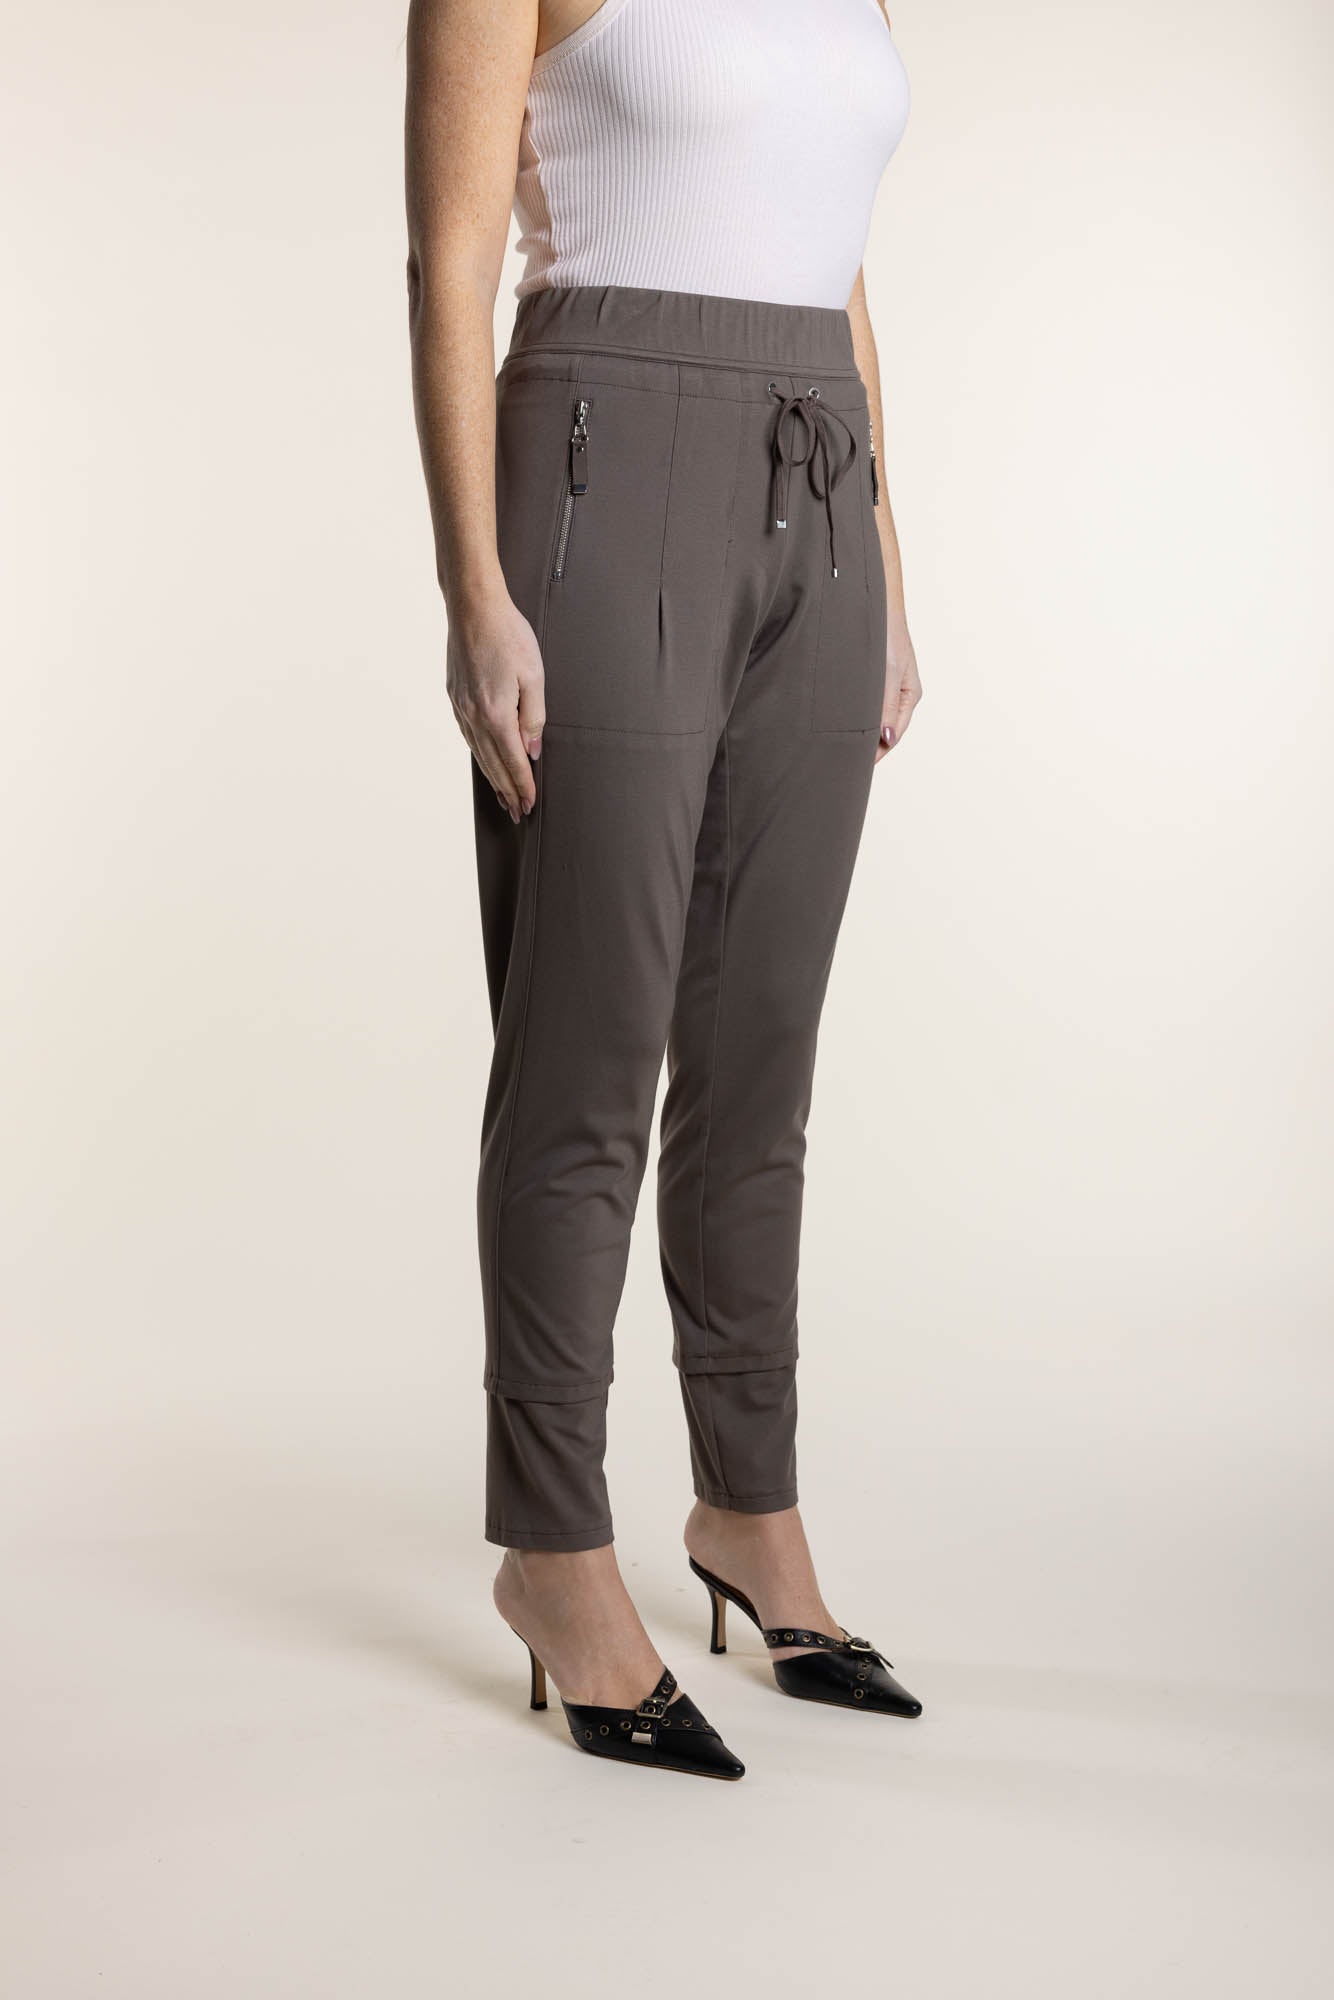 Two T's Ponte Pannelled Leggings - Clove